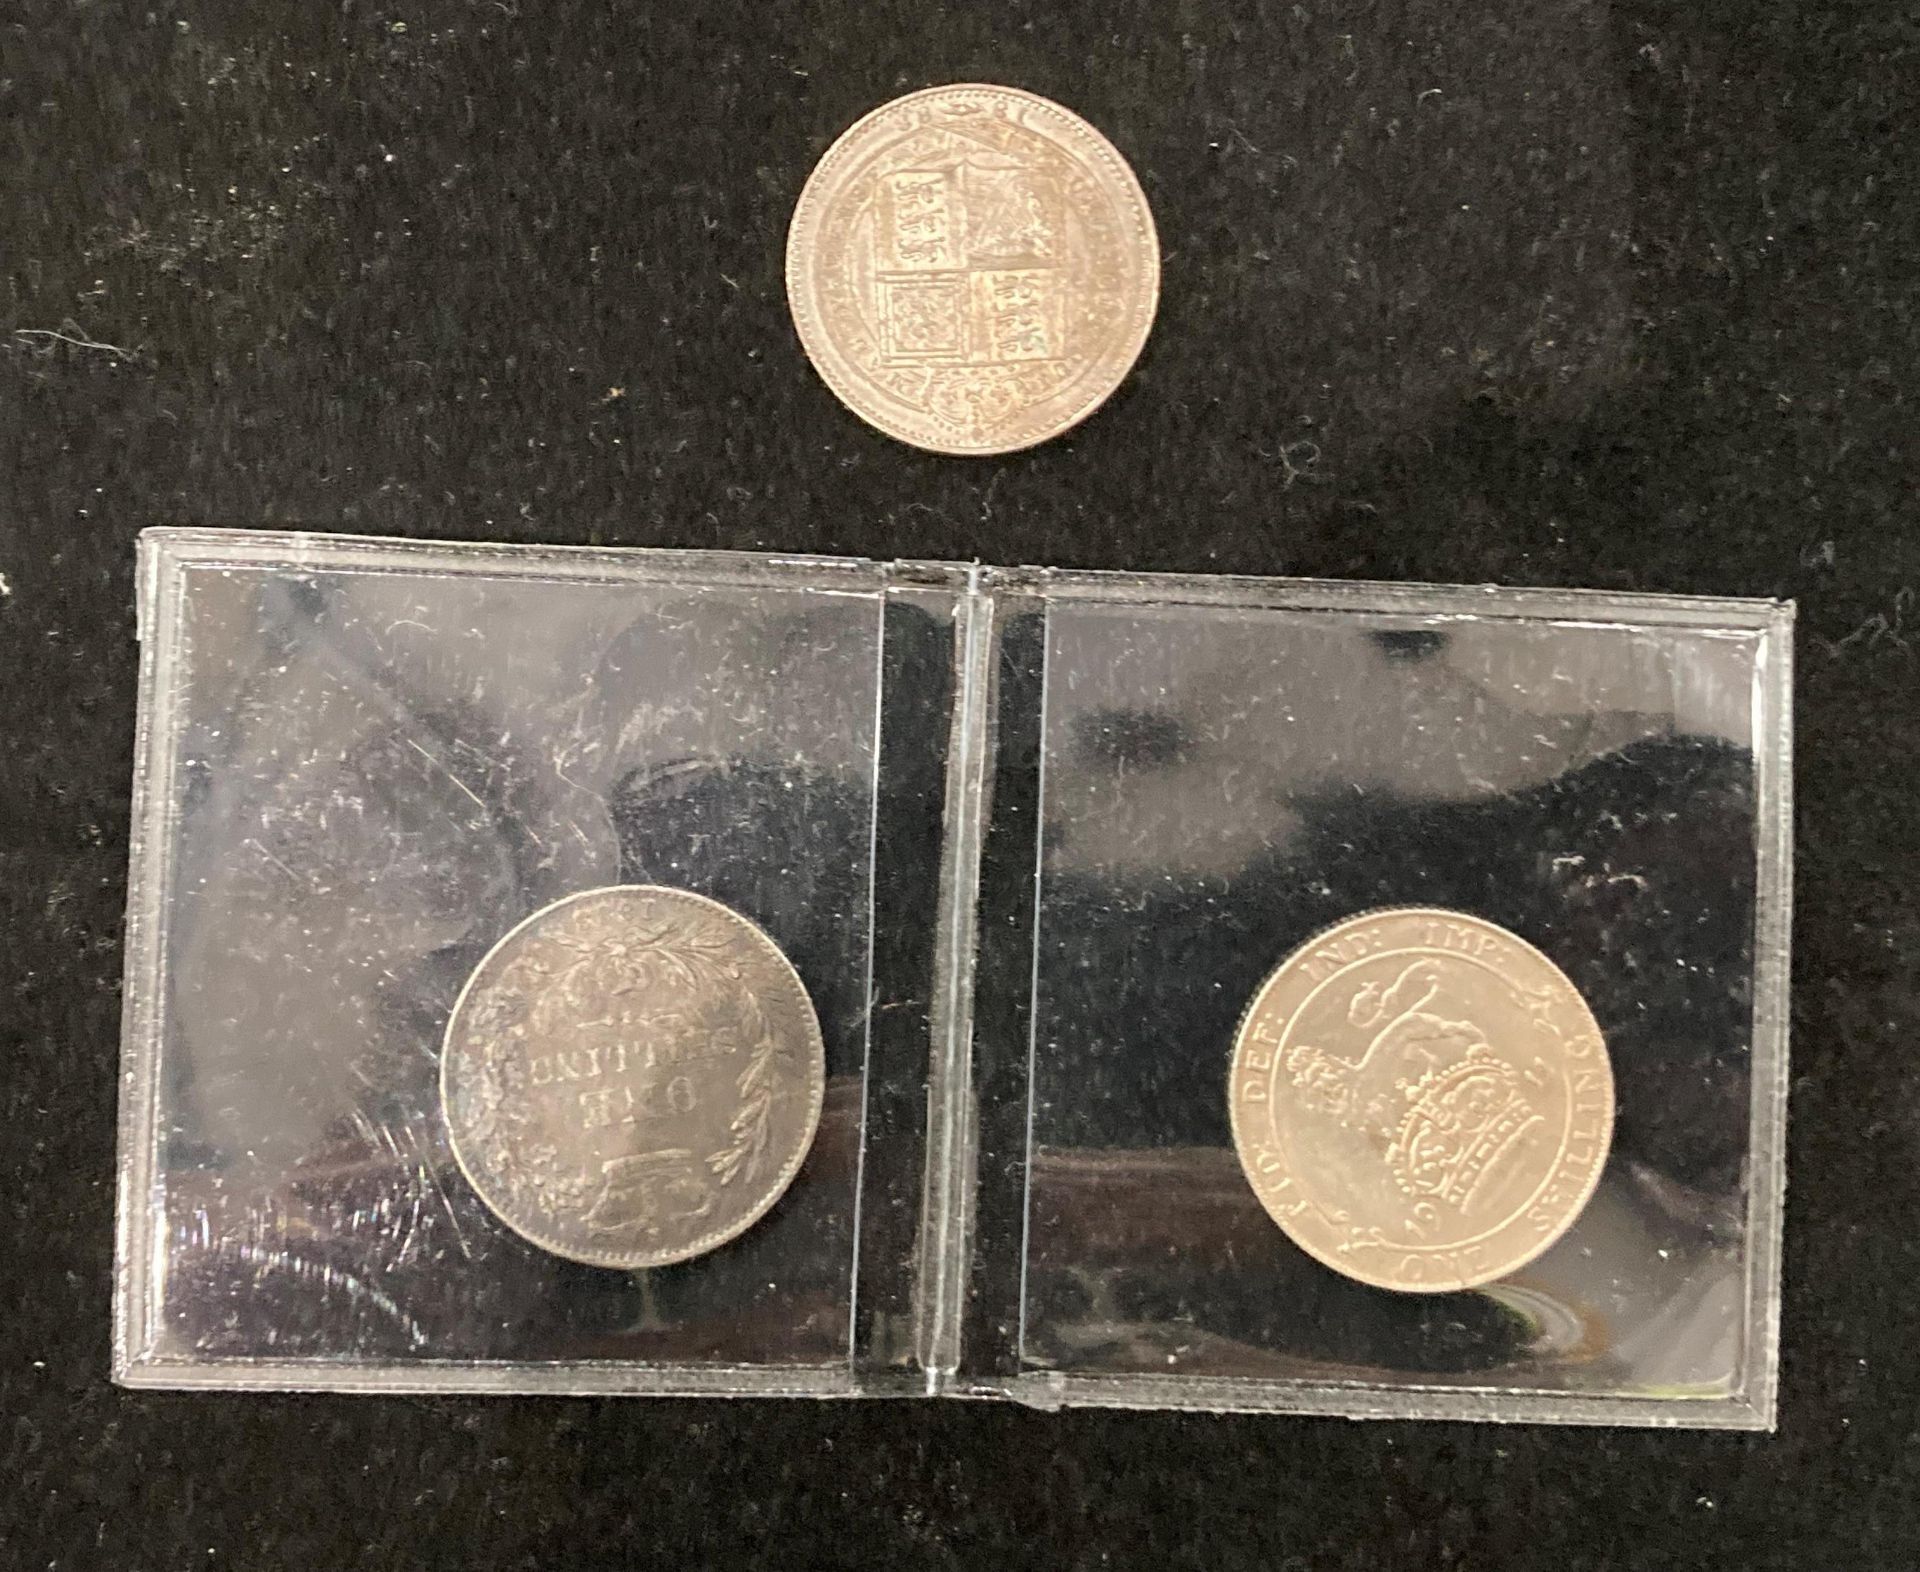 Three high grade silver shillings - 1883, 1888 and 1911. - Image 2 of 2